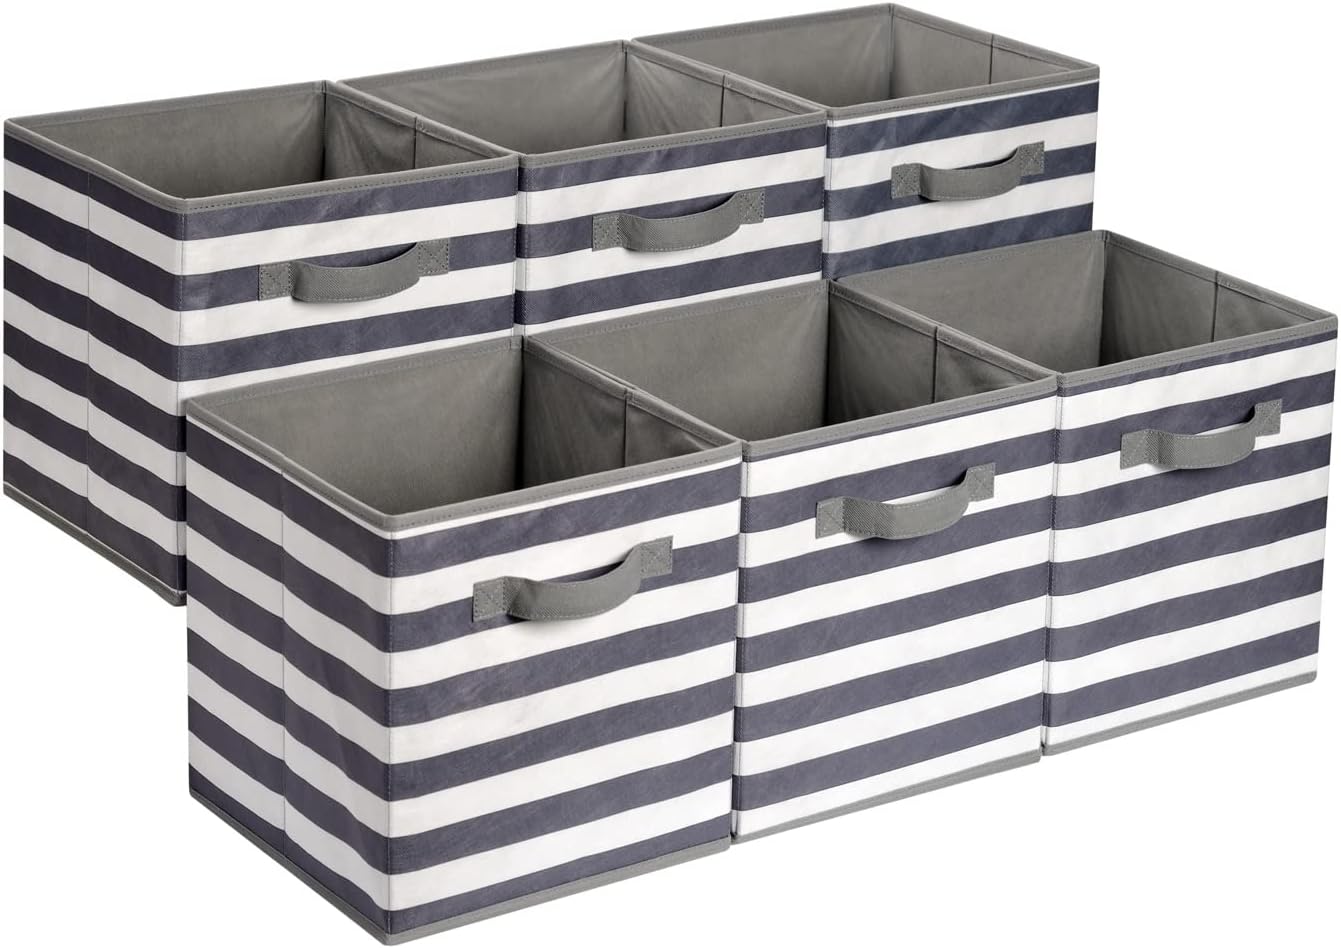 Amazon Basics Collapsible Fabric Storage Cube Organizer with Handles, 10.5 x 10.5 x 11 Inch, White/ Light Grey Stripe - Pack of 6